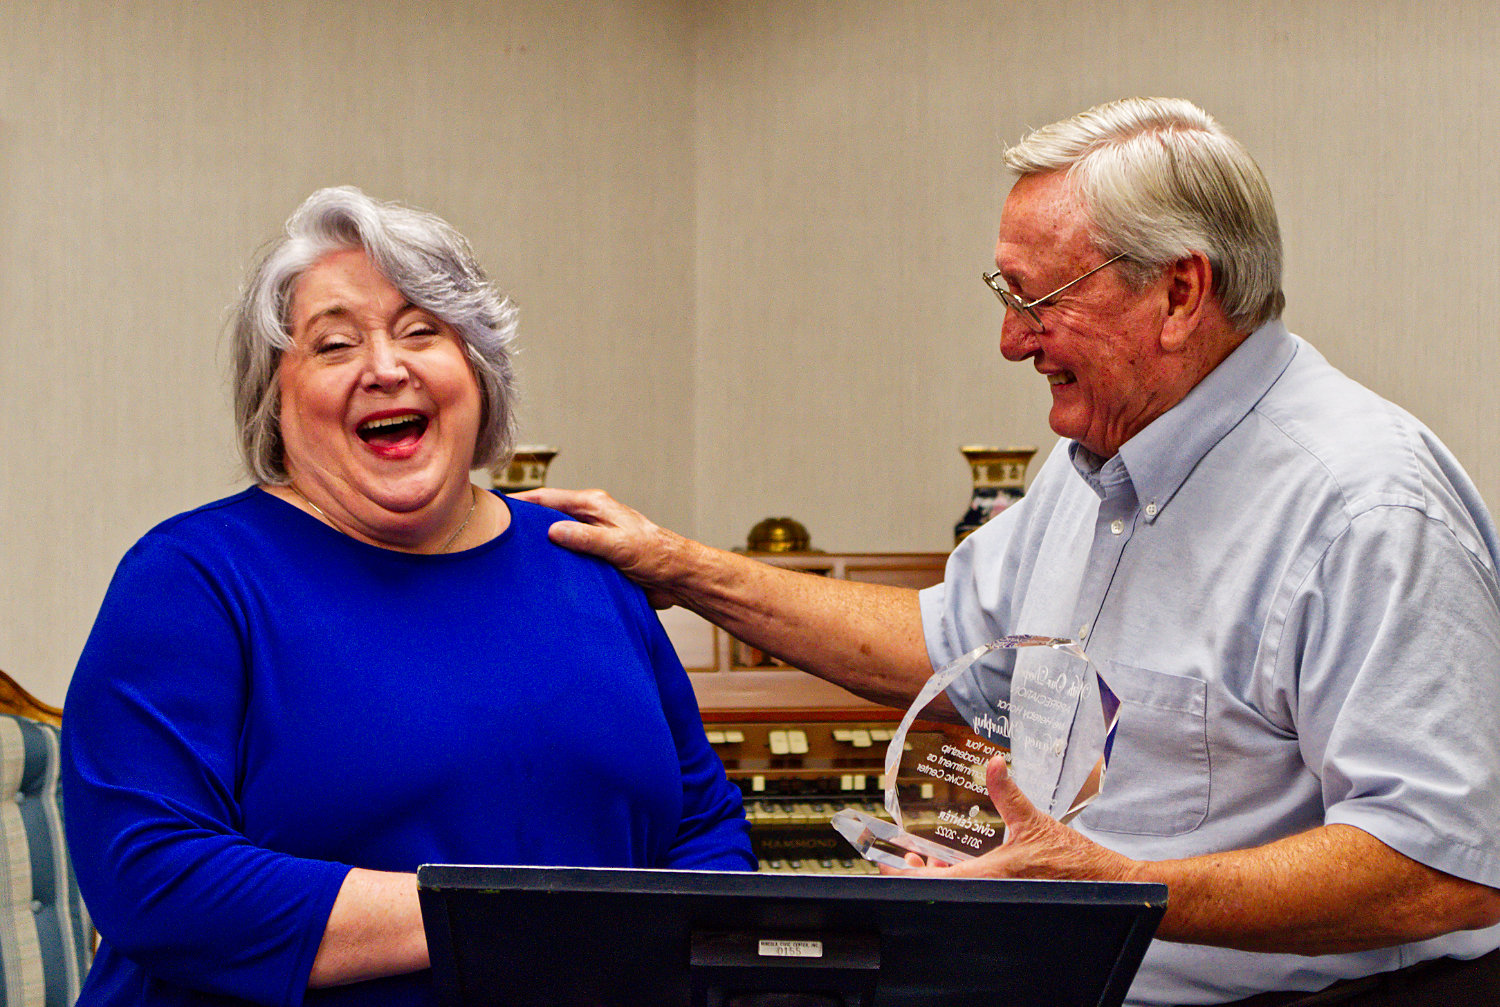 John Fuller gets a laugh from Nancy Murphy during her retirement reception at the Mineola Civic Center.